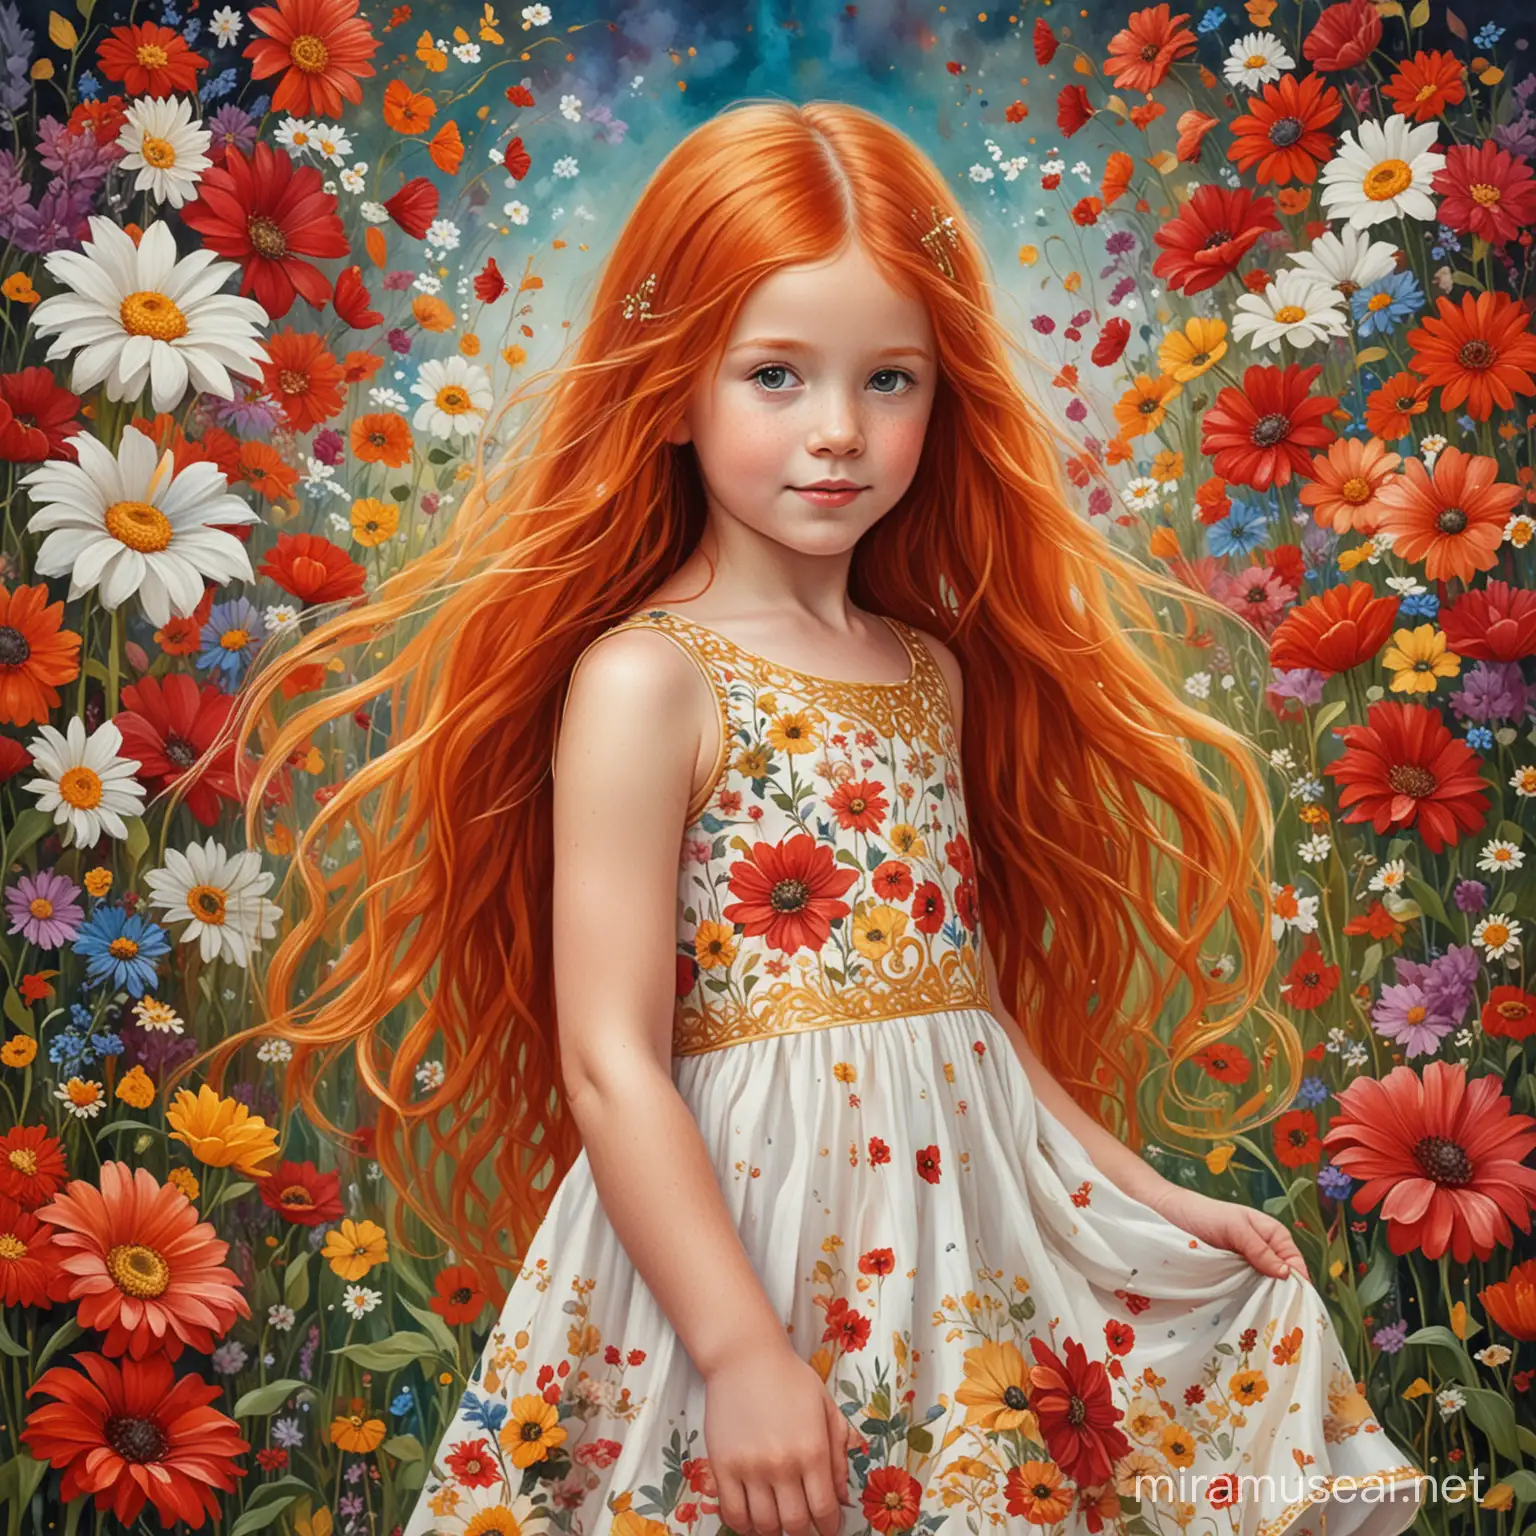 Whimsical art, A little girl with long red hair, red and white dress with flowers, background of colorful flowers with gold.